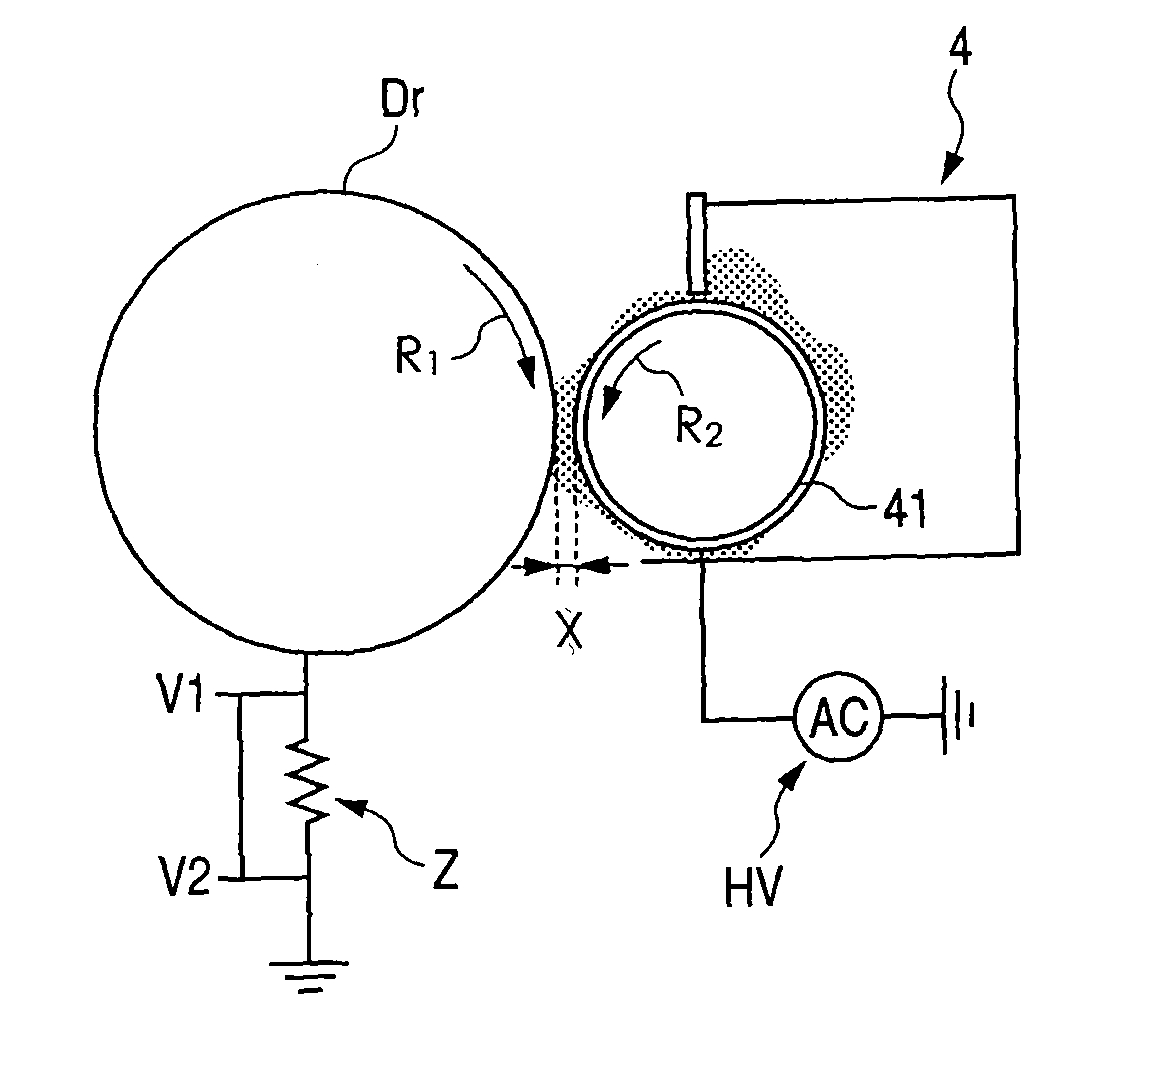 Image forming apparatus using peak AC potentials to move toner toward an image bearing member and a developer carrying member, respectively